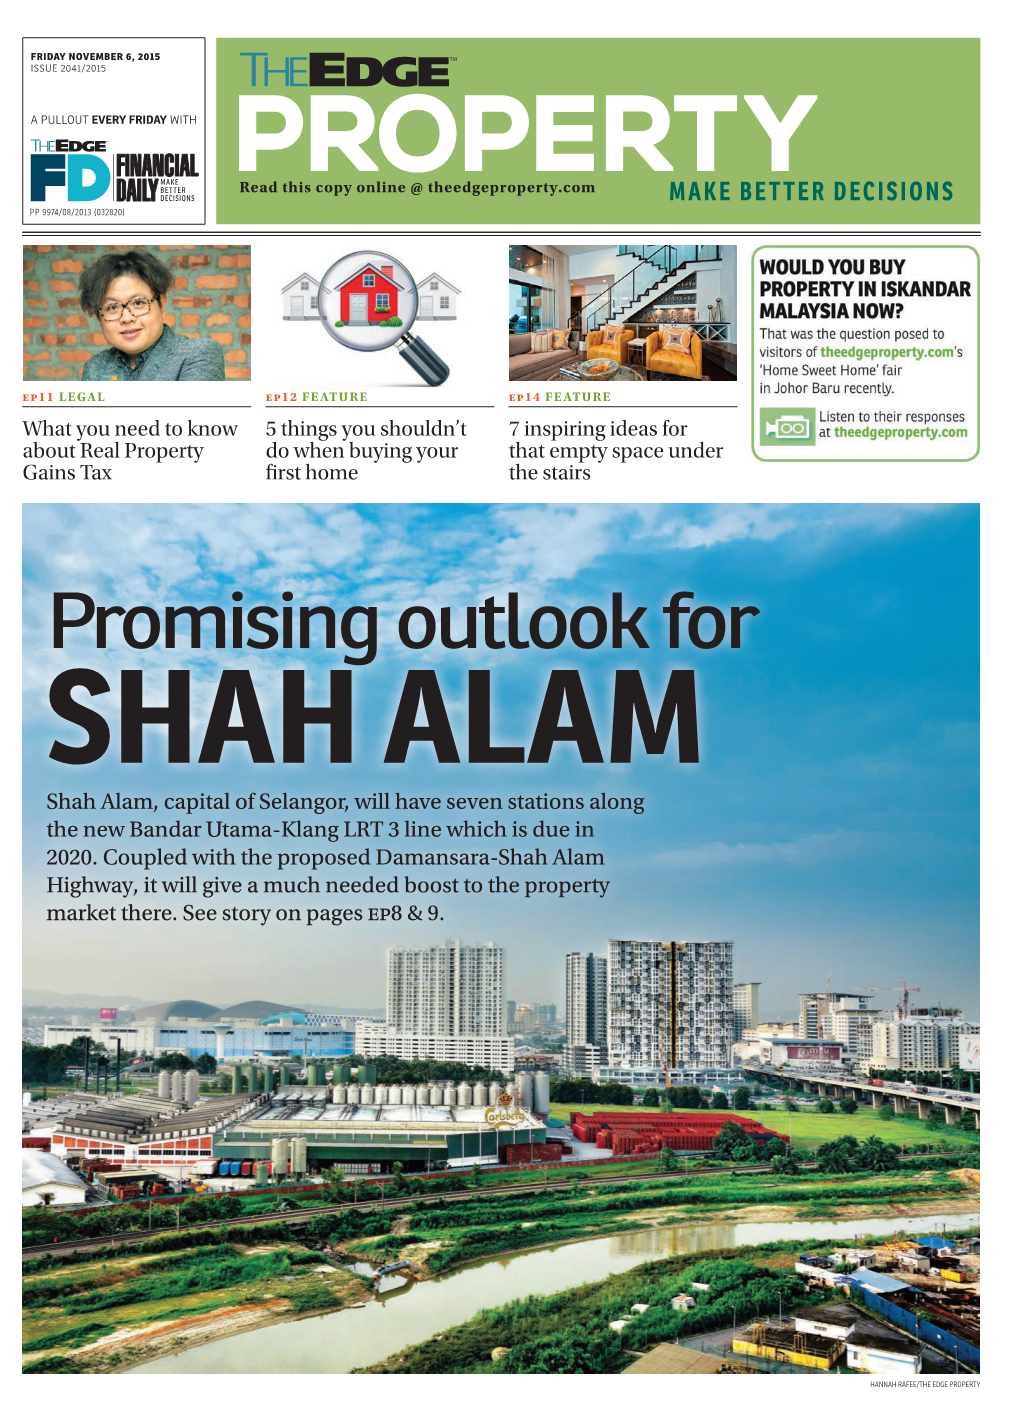 Promising Outlook for SHAH ALAM Shah Alam, Capital of Selangor, Will Have Seven Stations Along the New Bandar Utama-Klang LRT 3 Line Which Is Due in 2020